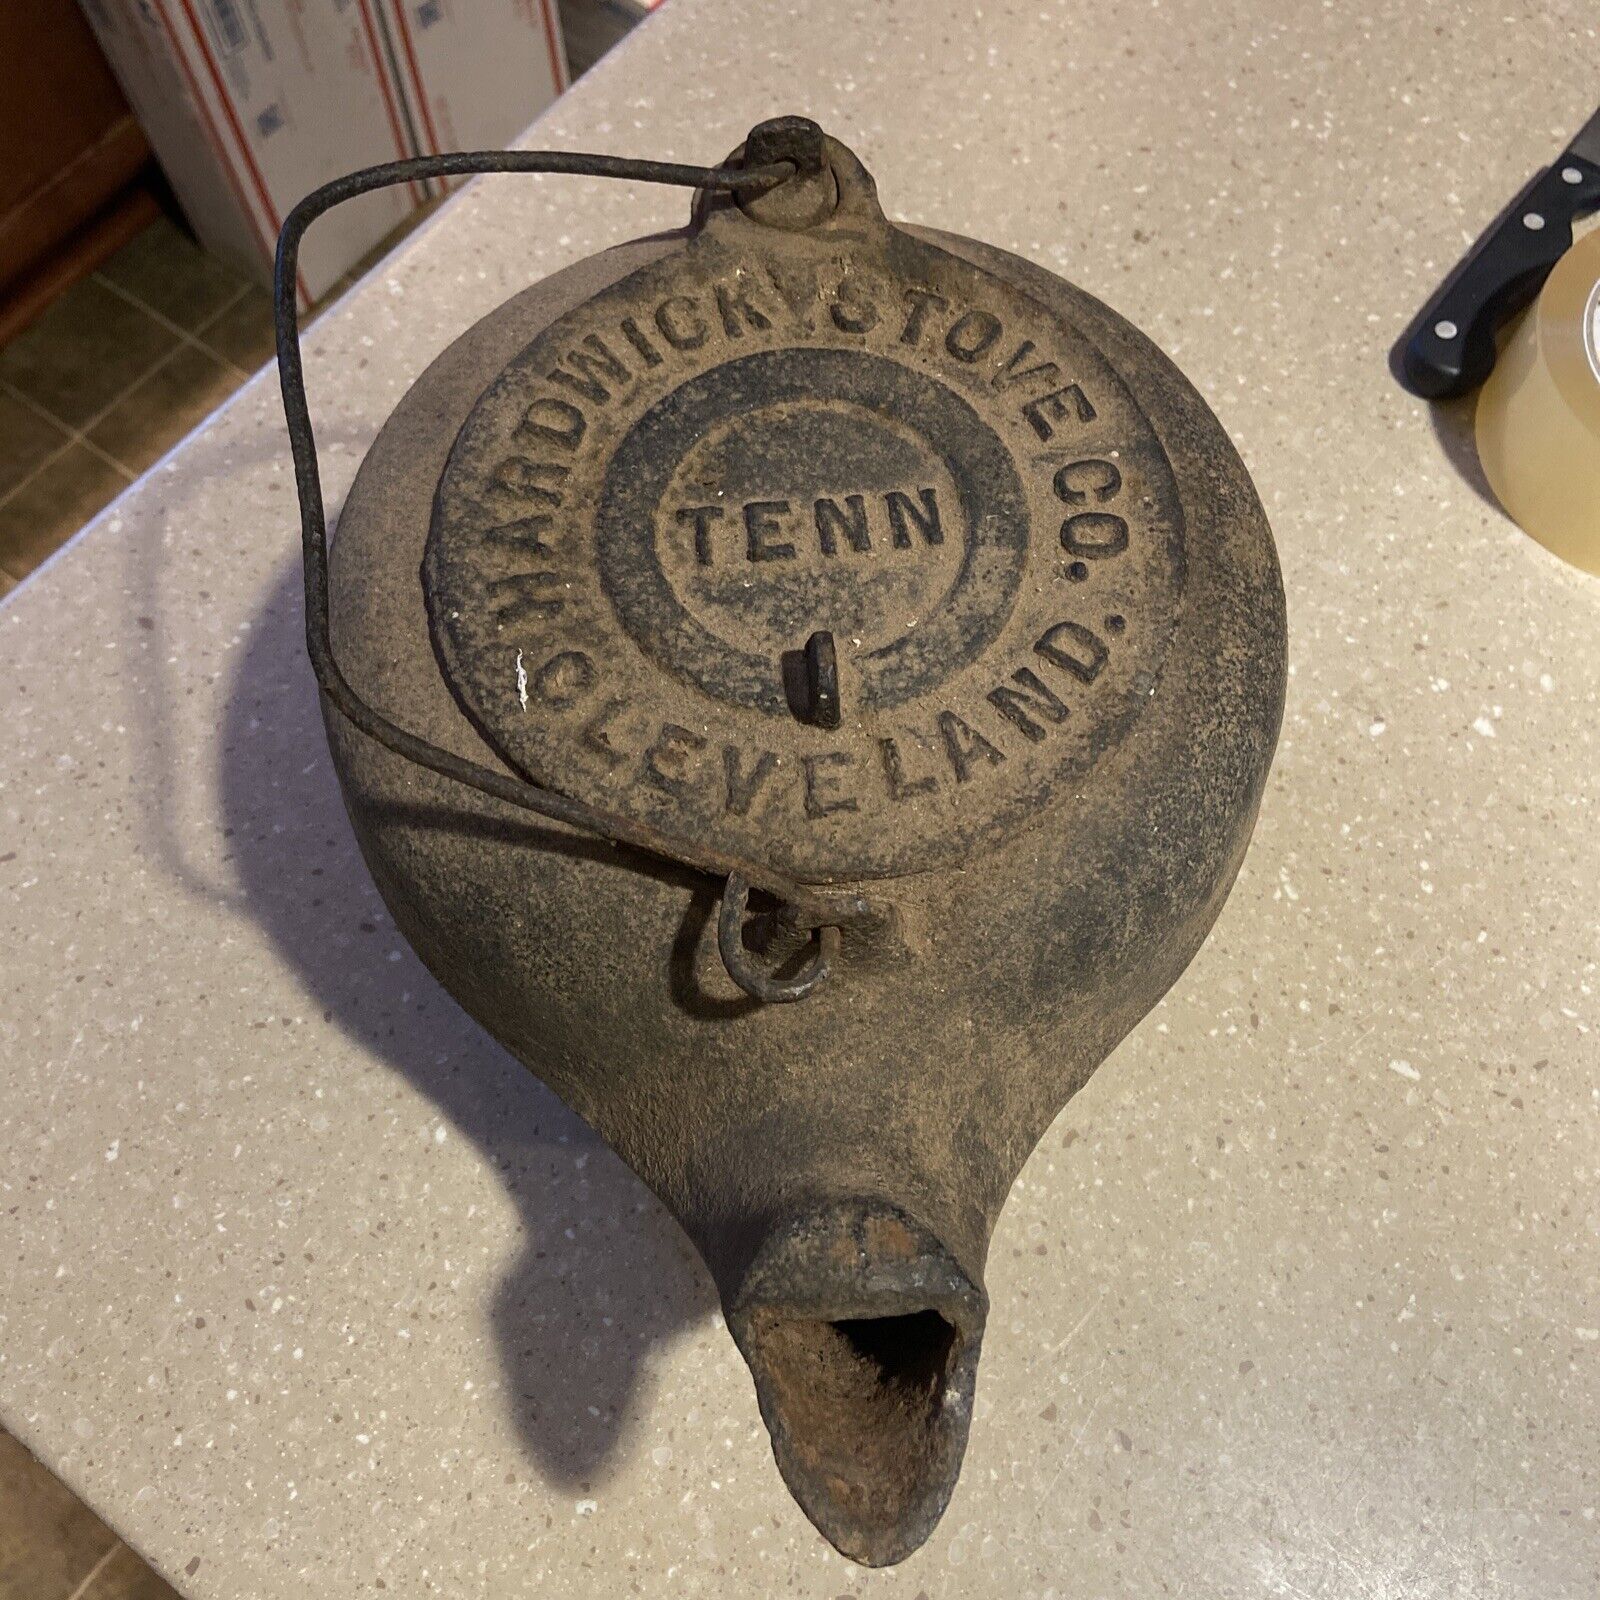 Antique Hardwick Stove Co. Cleveland Tennessee Cast Iron Kettle Teapot